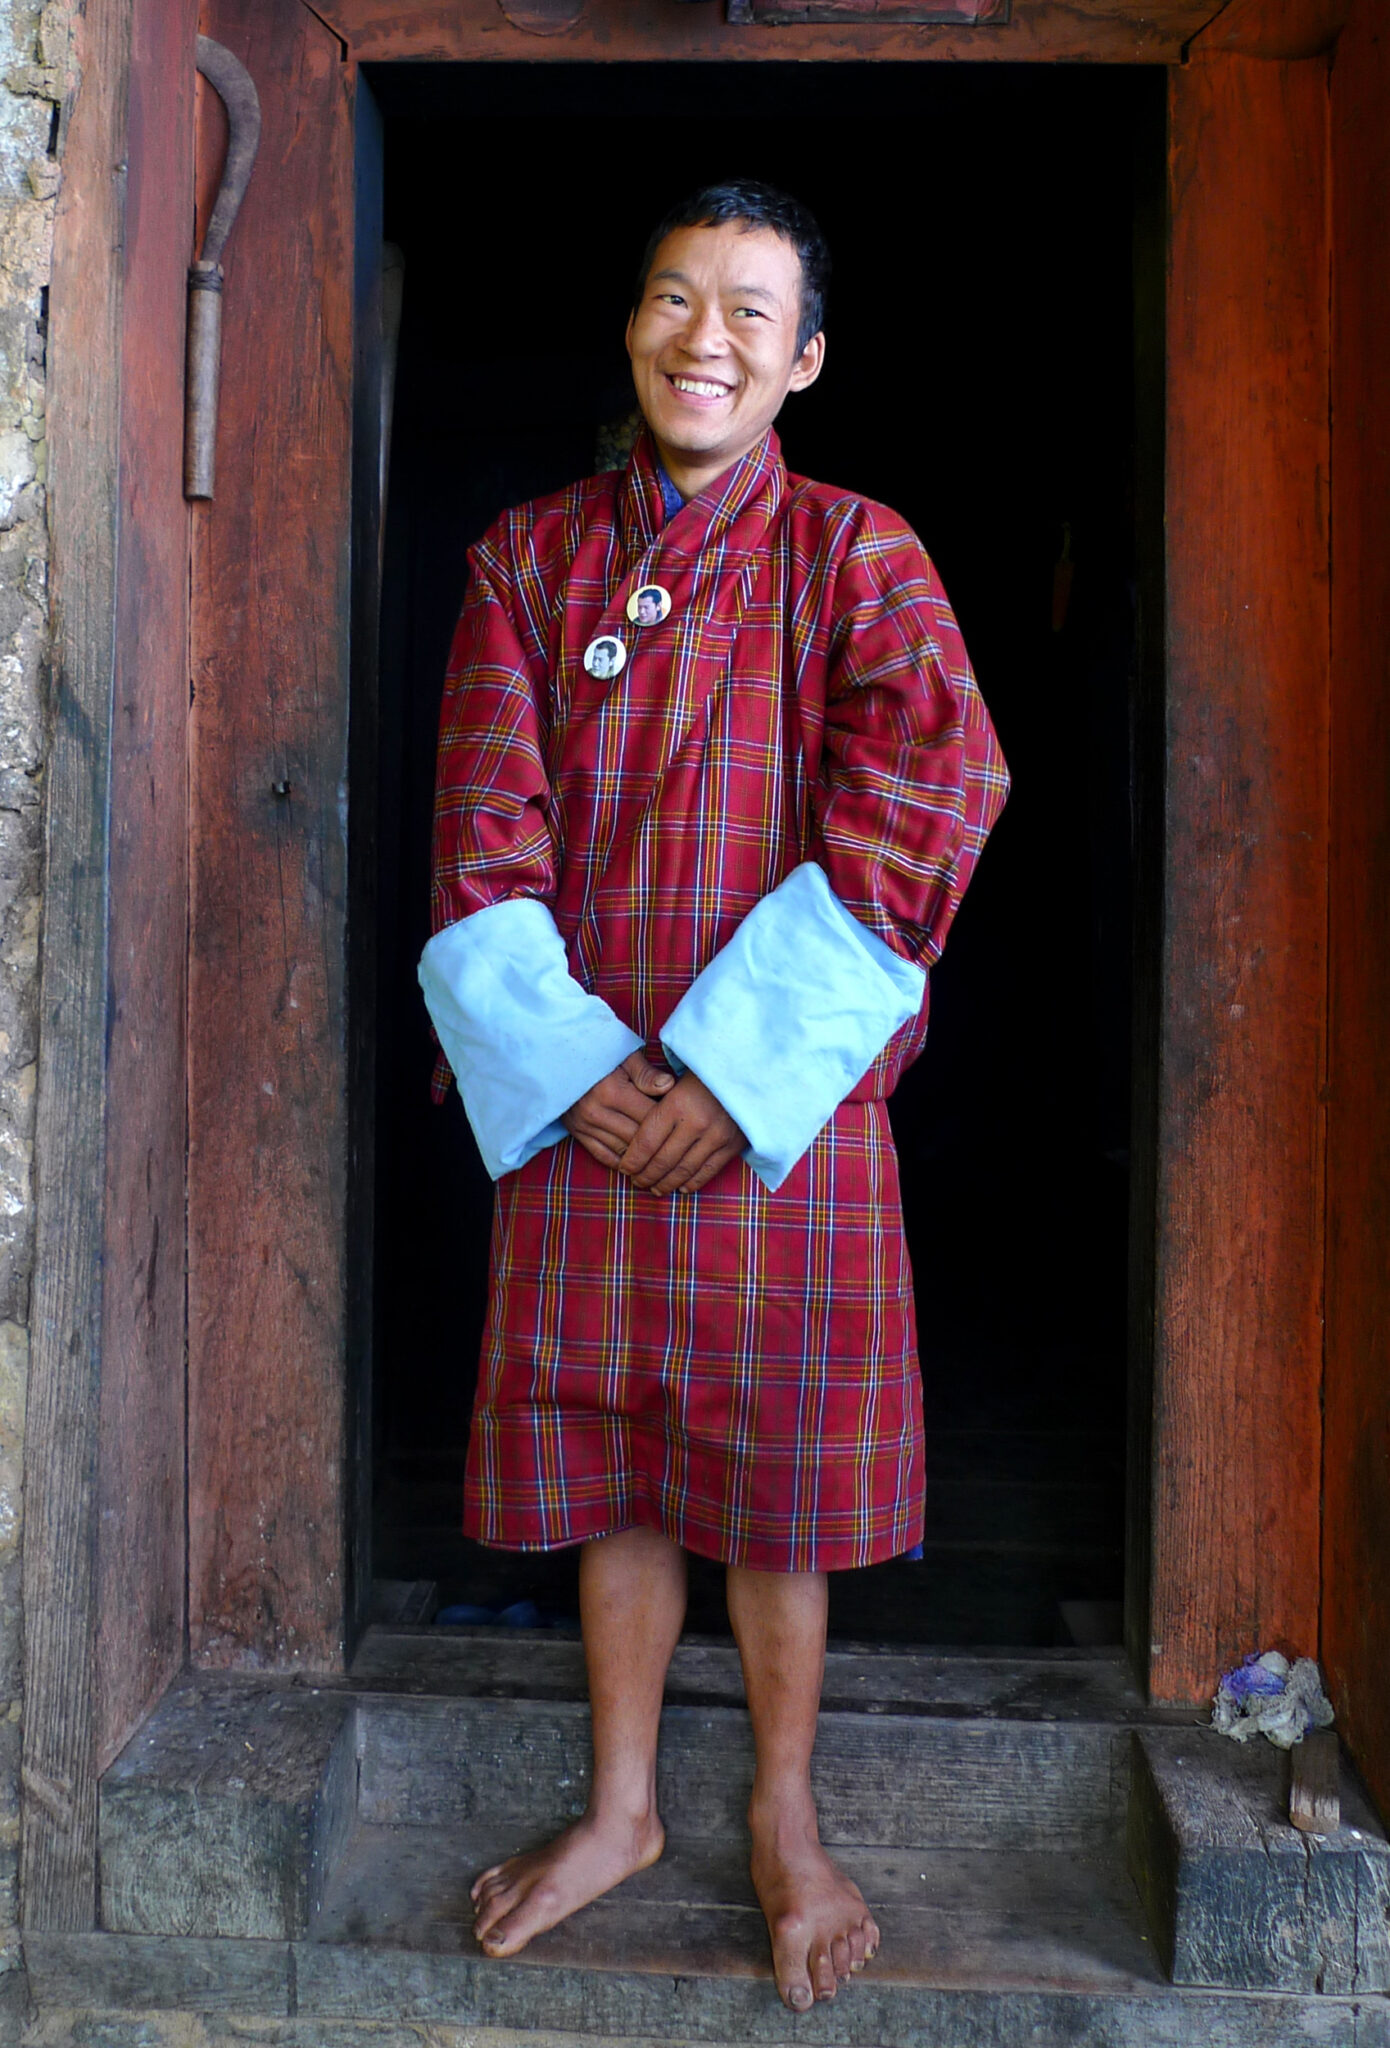 Man stands smiling in doorway wearing red plaid tunic with white cuffs covering forearms